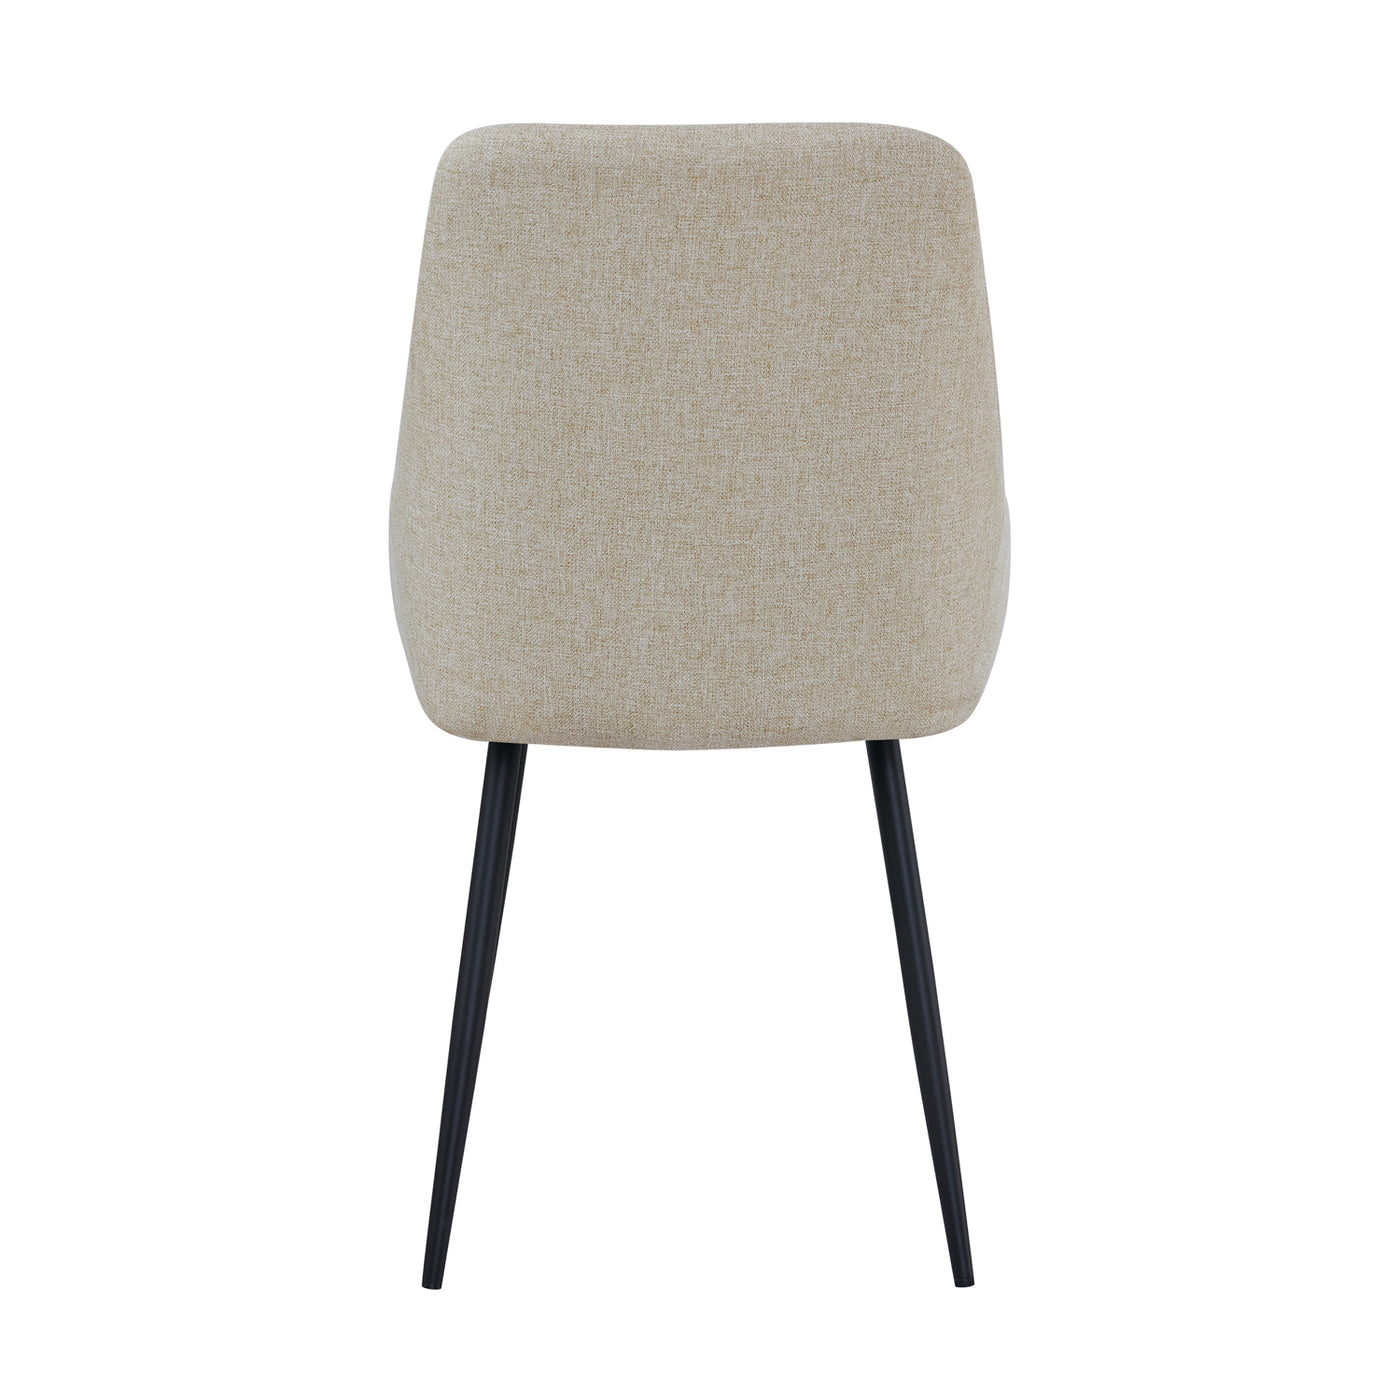 Mia Dining Chair in Beige Fabric